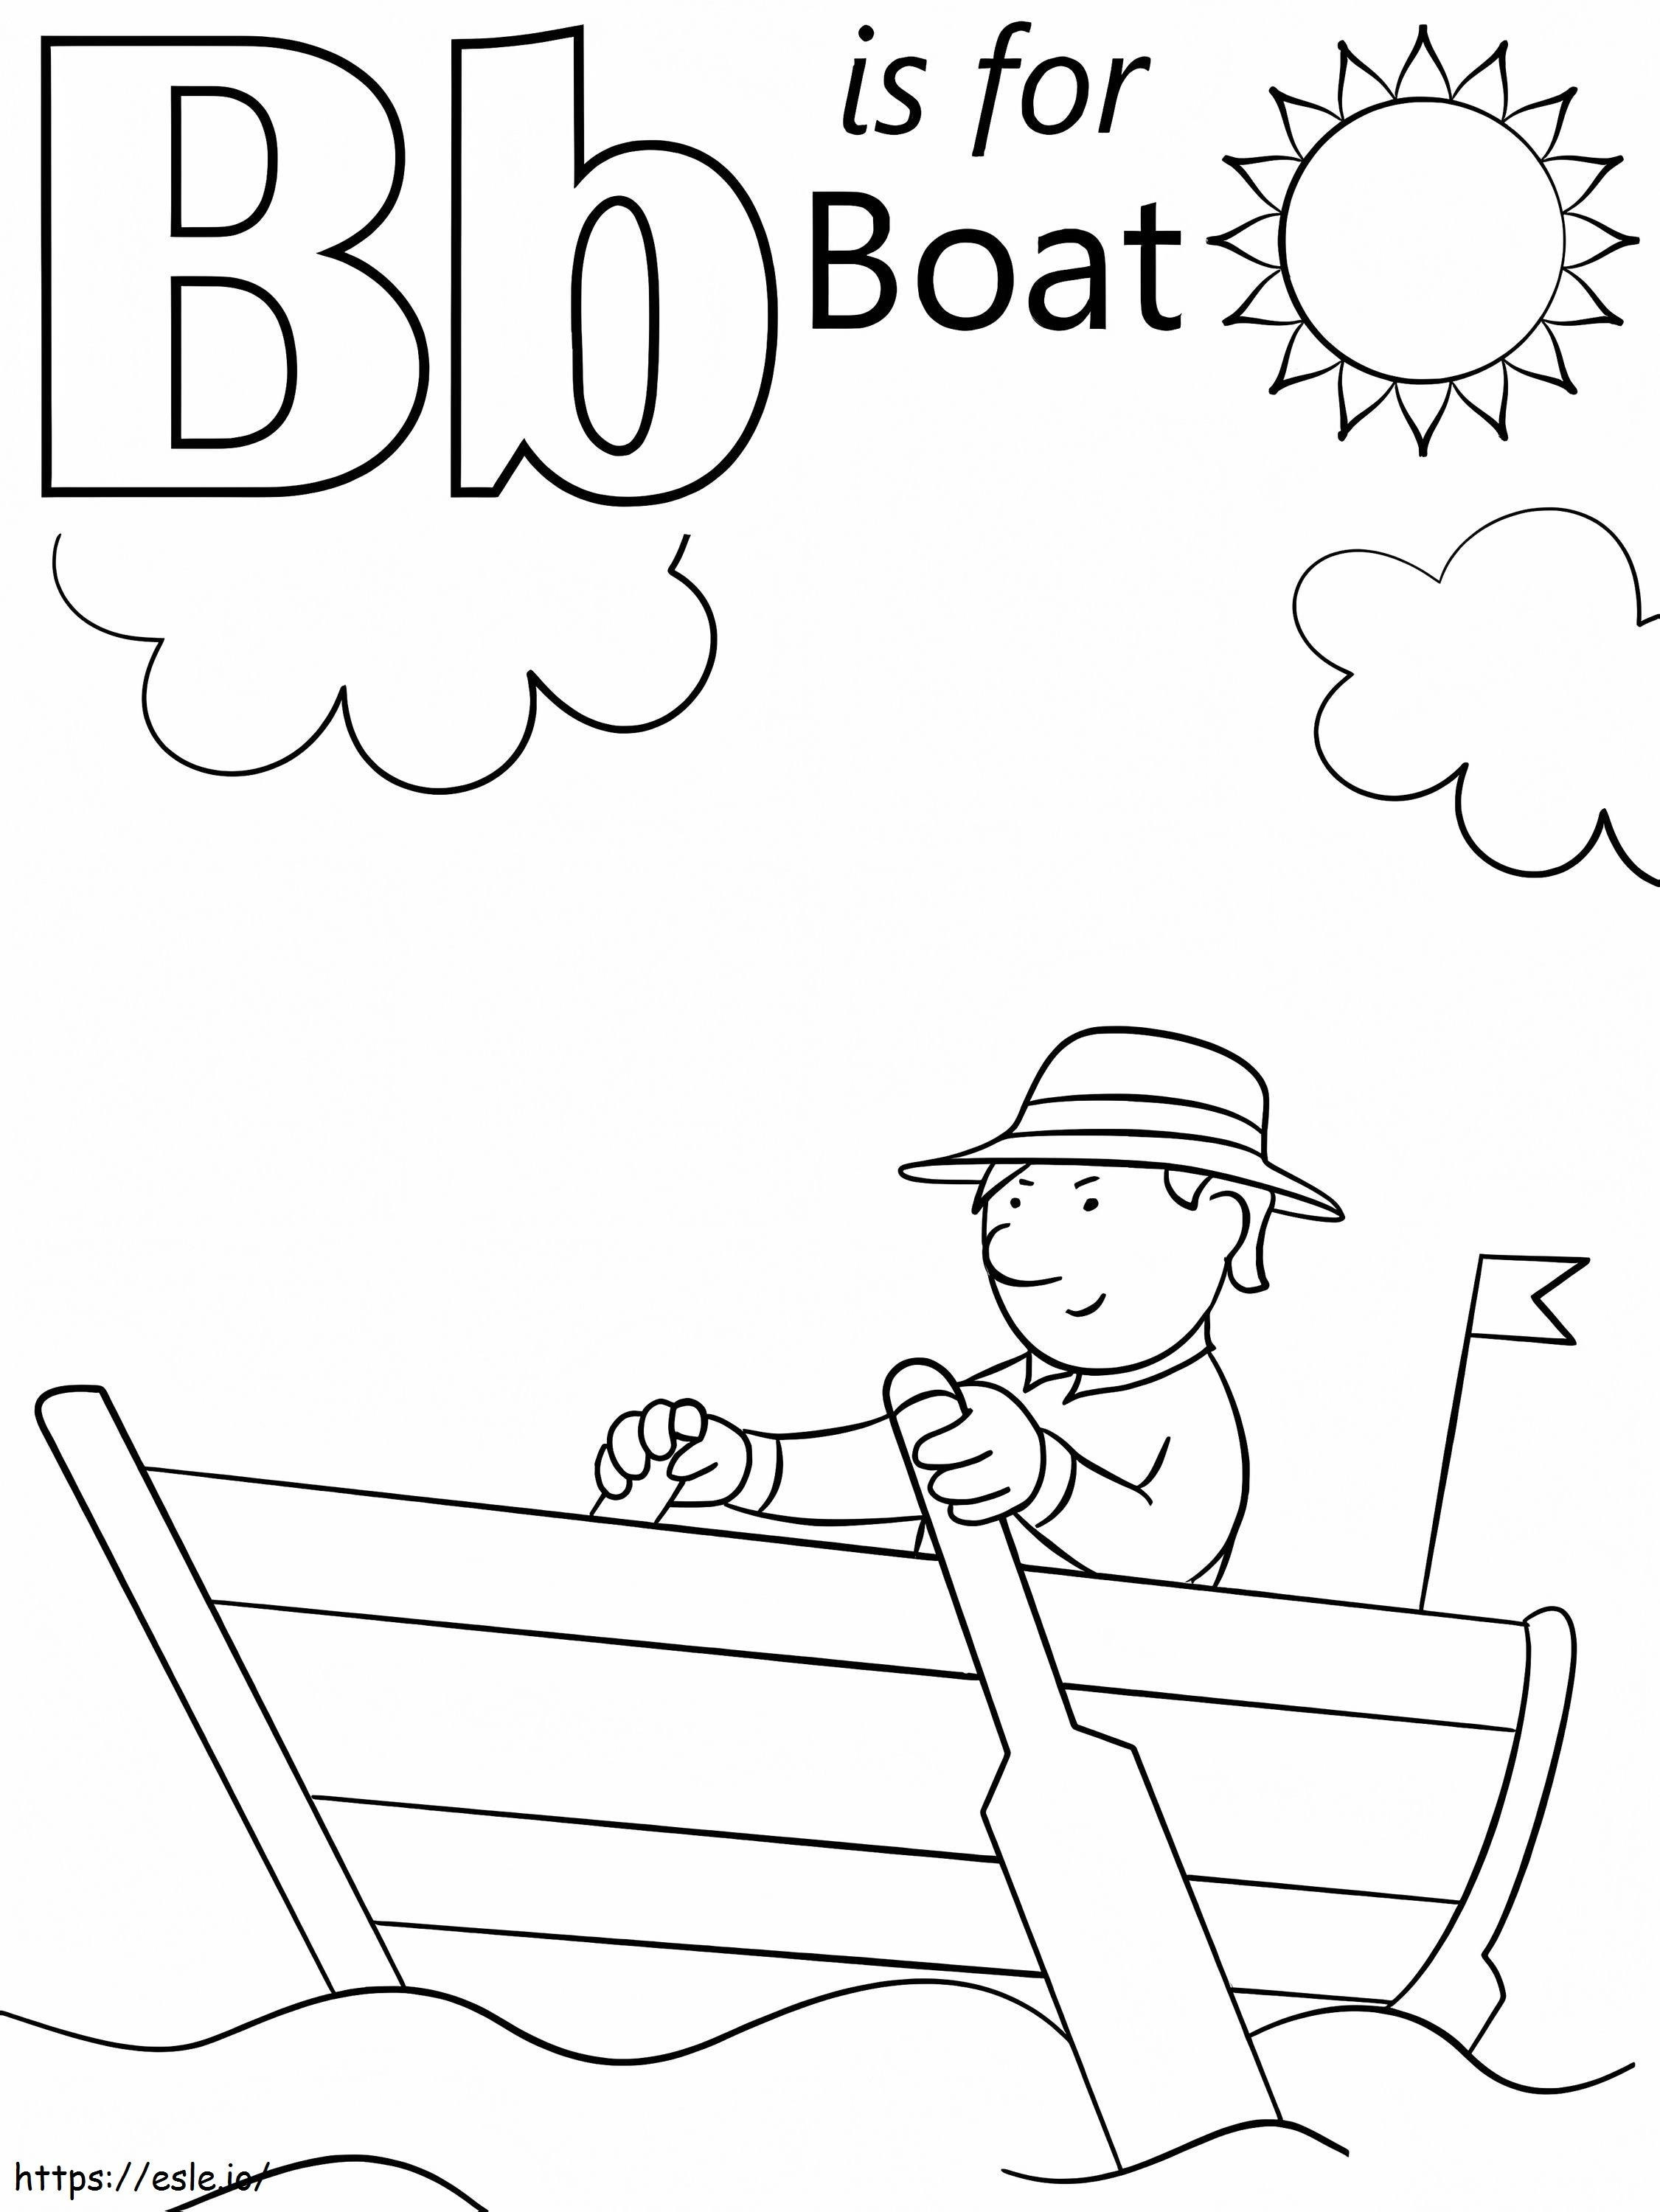 Ship Letter B coloring page